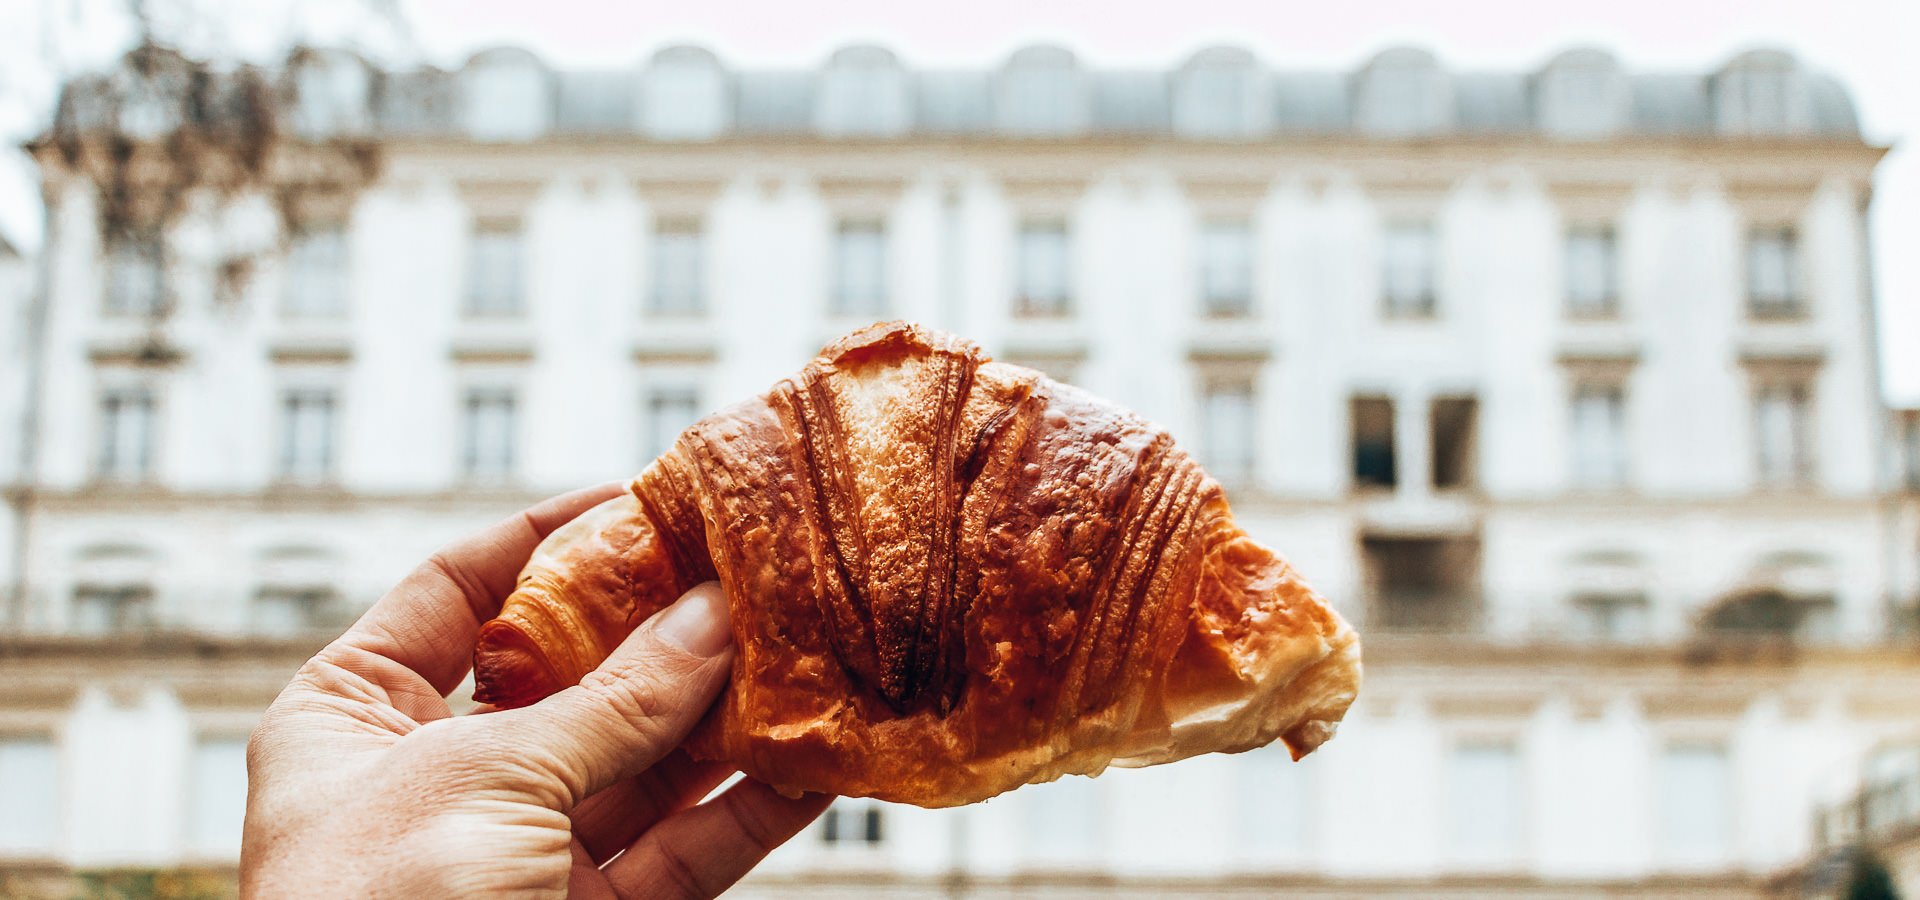 8 Of The Best Bakeries and Pâtisseries In Paris | best bakeries and pâtisseries in paris 1